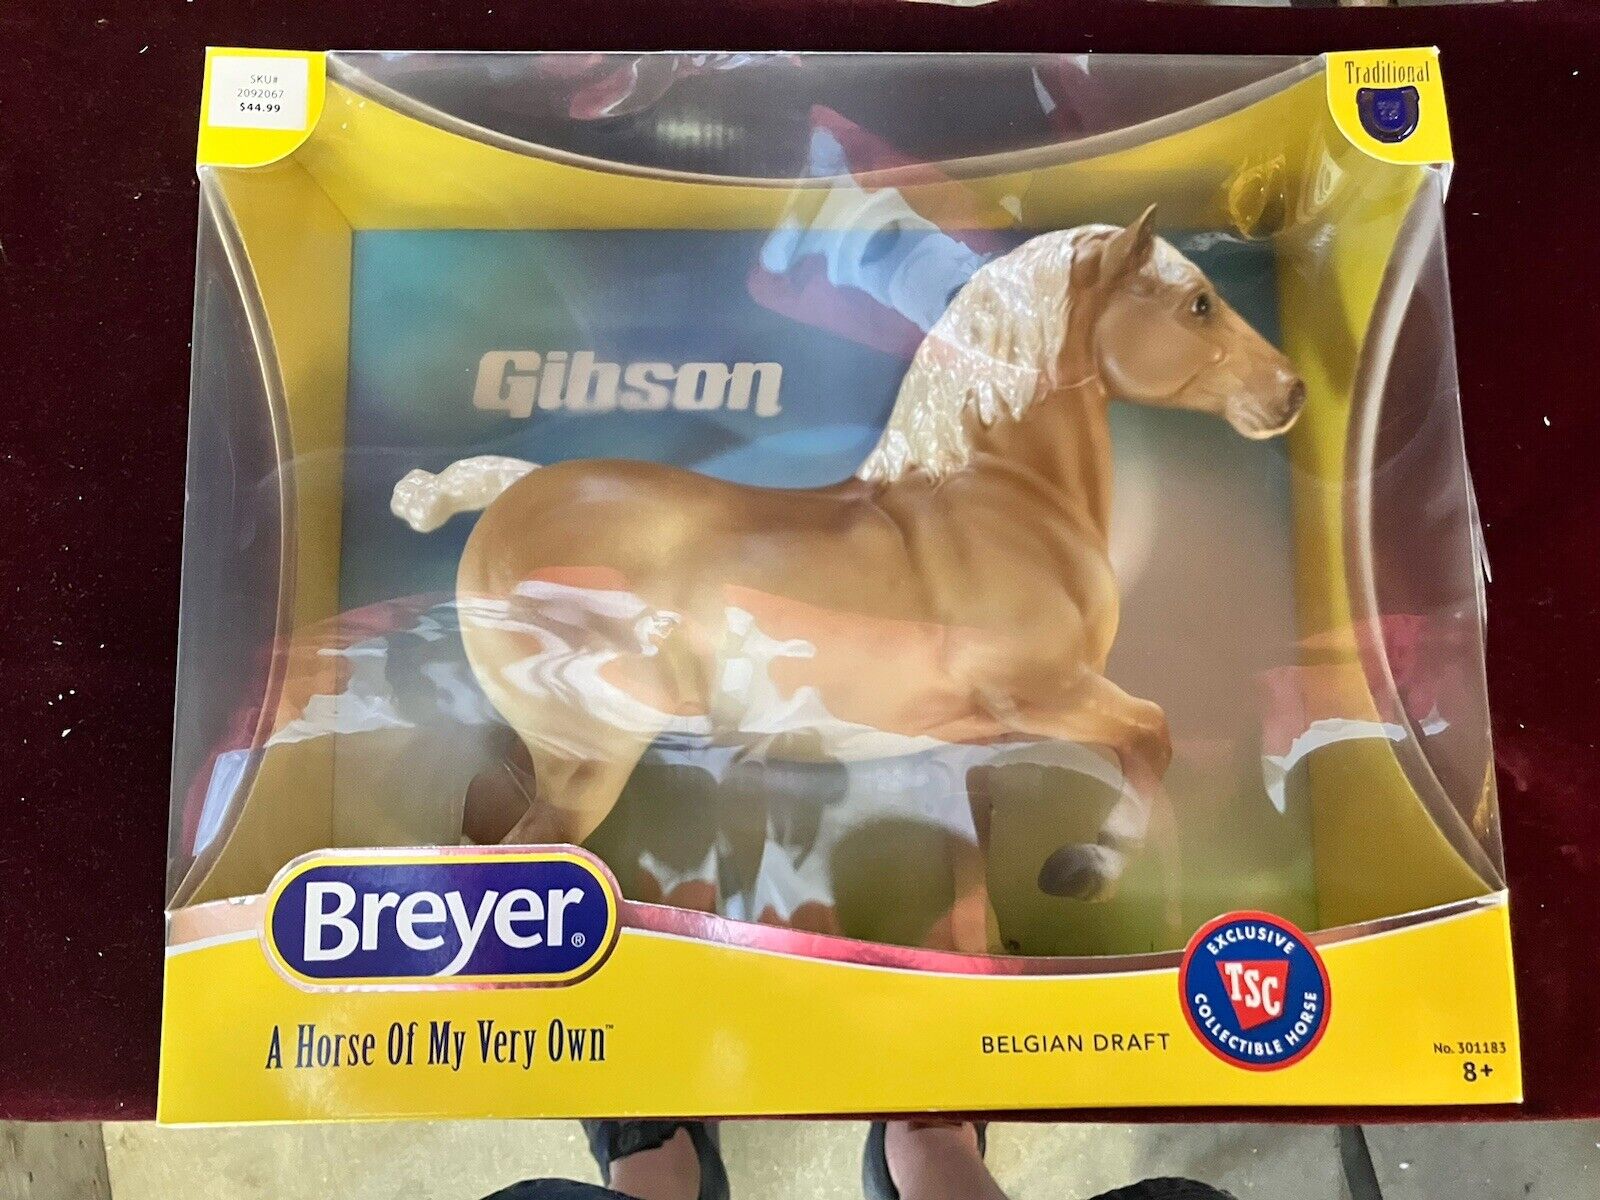 Breyer TSC Exclusive Gibson Belgian Draft Horse Limited Edition 1:9 scale 301183